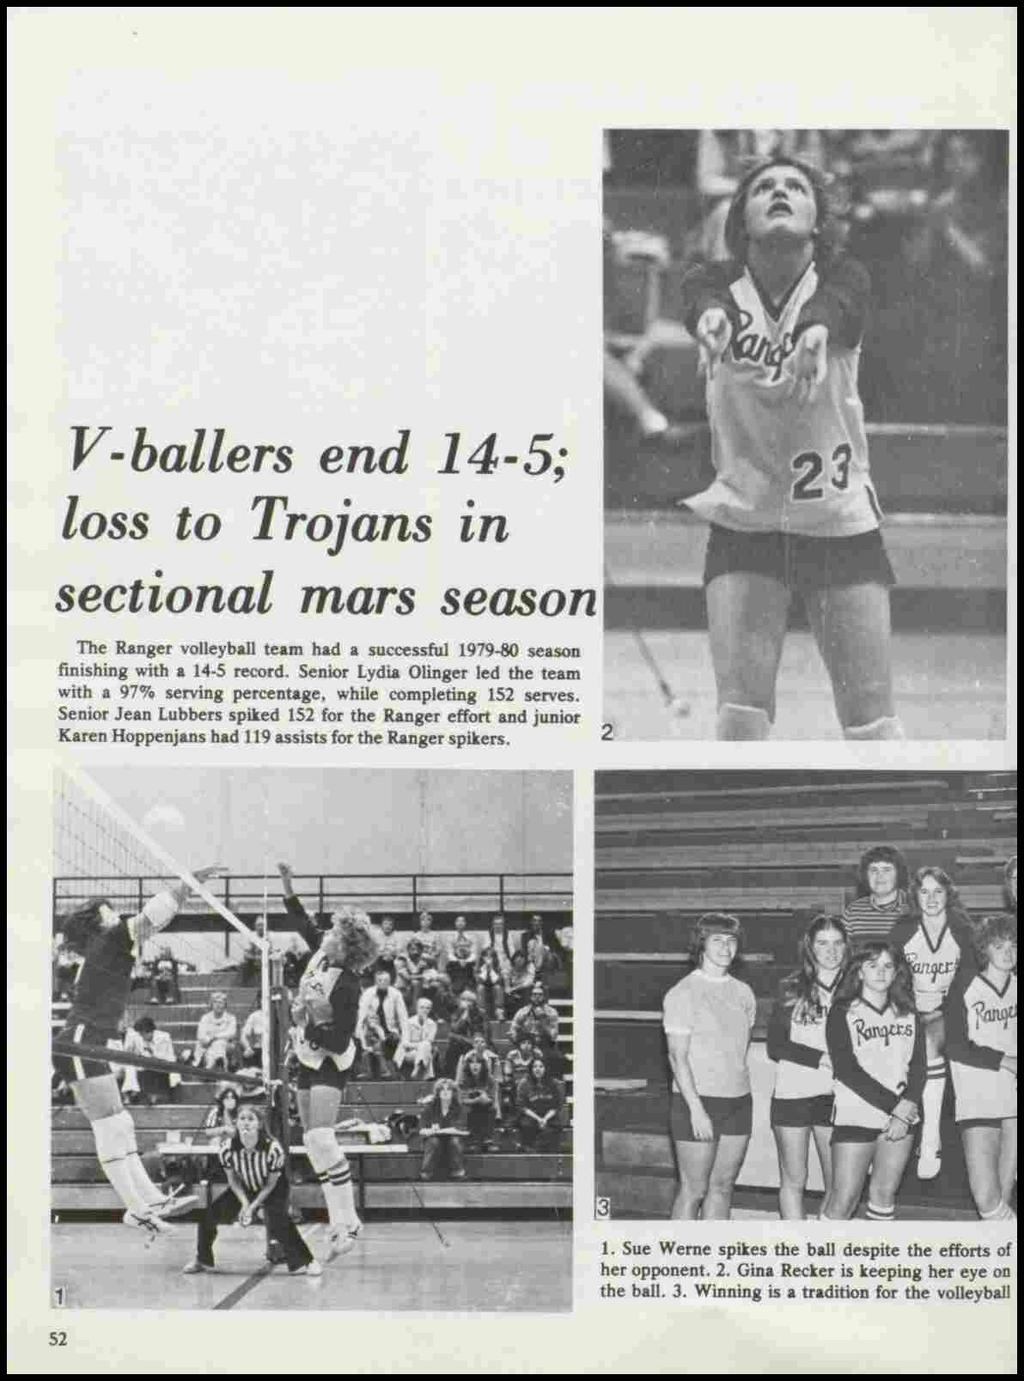 V-ballers end 14-5; loss to Trojans in sectional mars season The Ranger volleyball team had a successful 1979-80 season finishing with a 14-5 record.